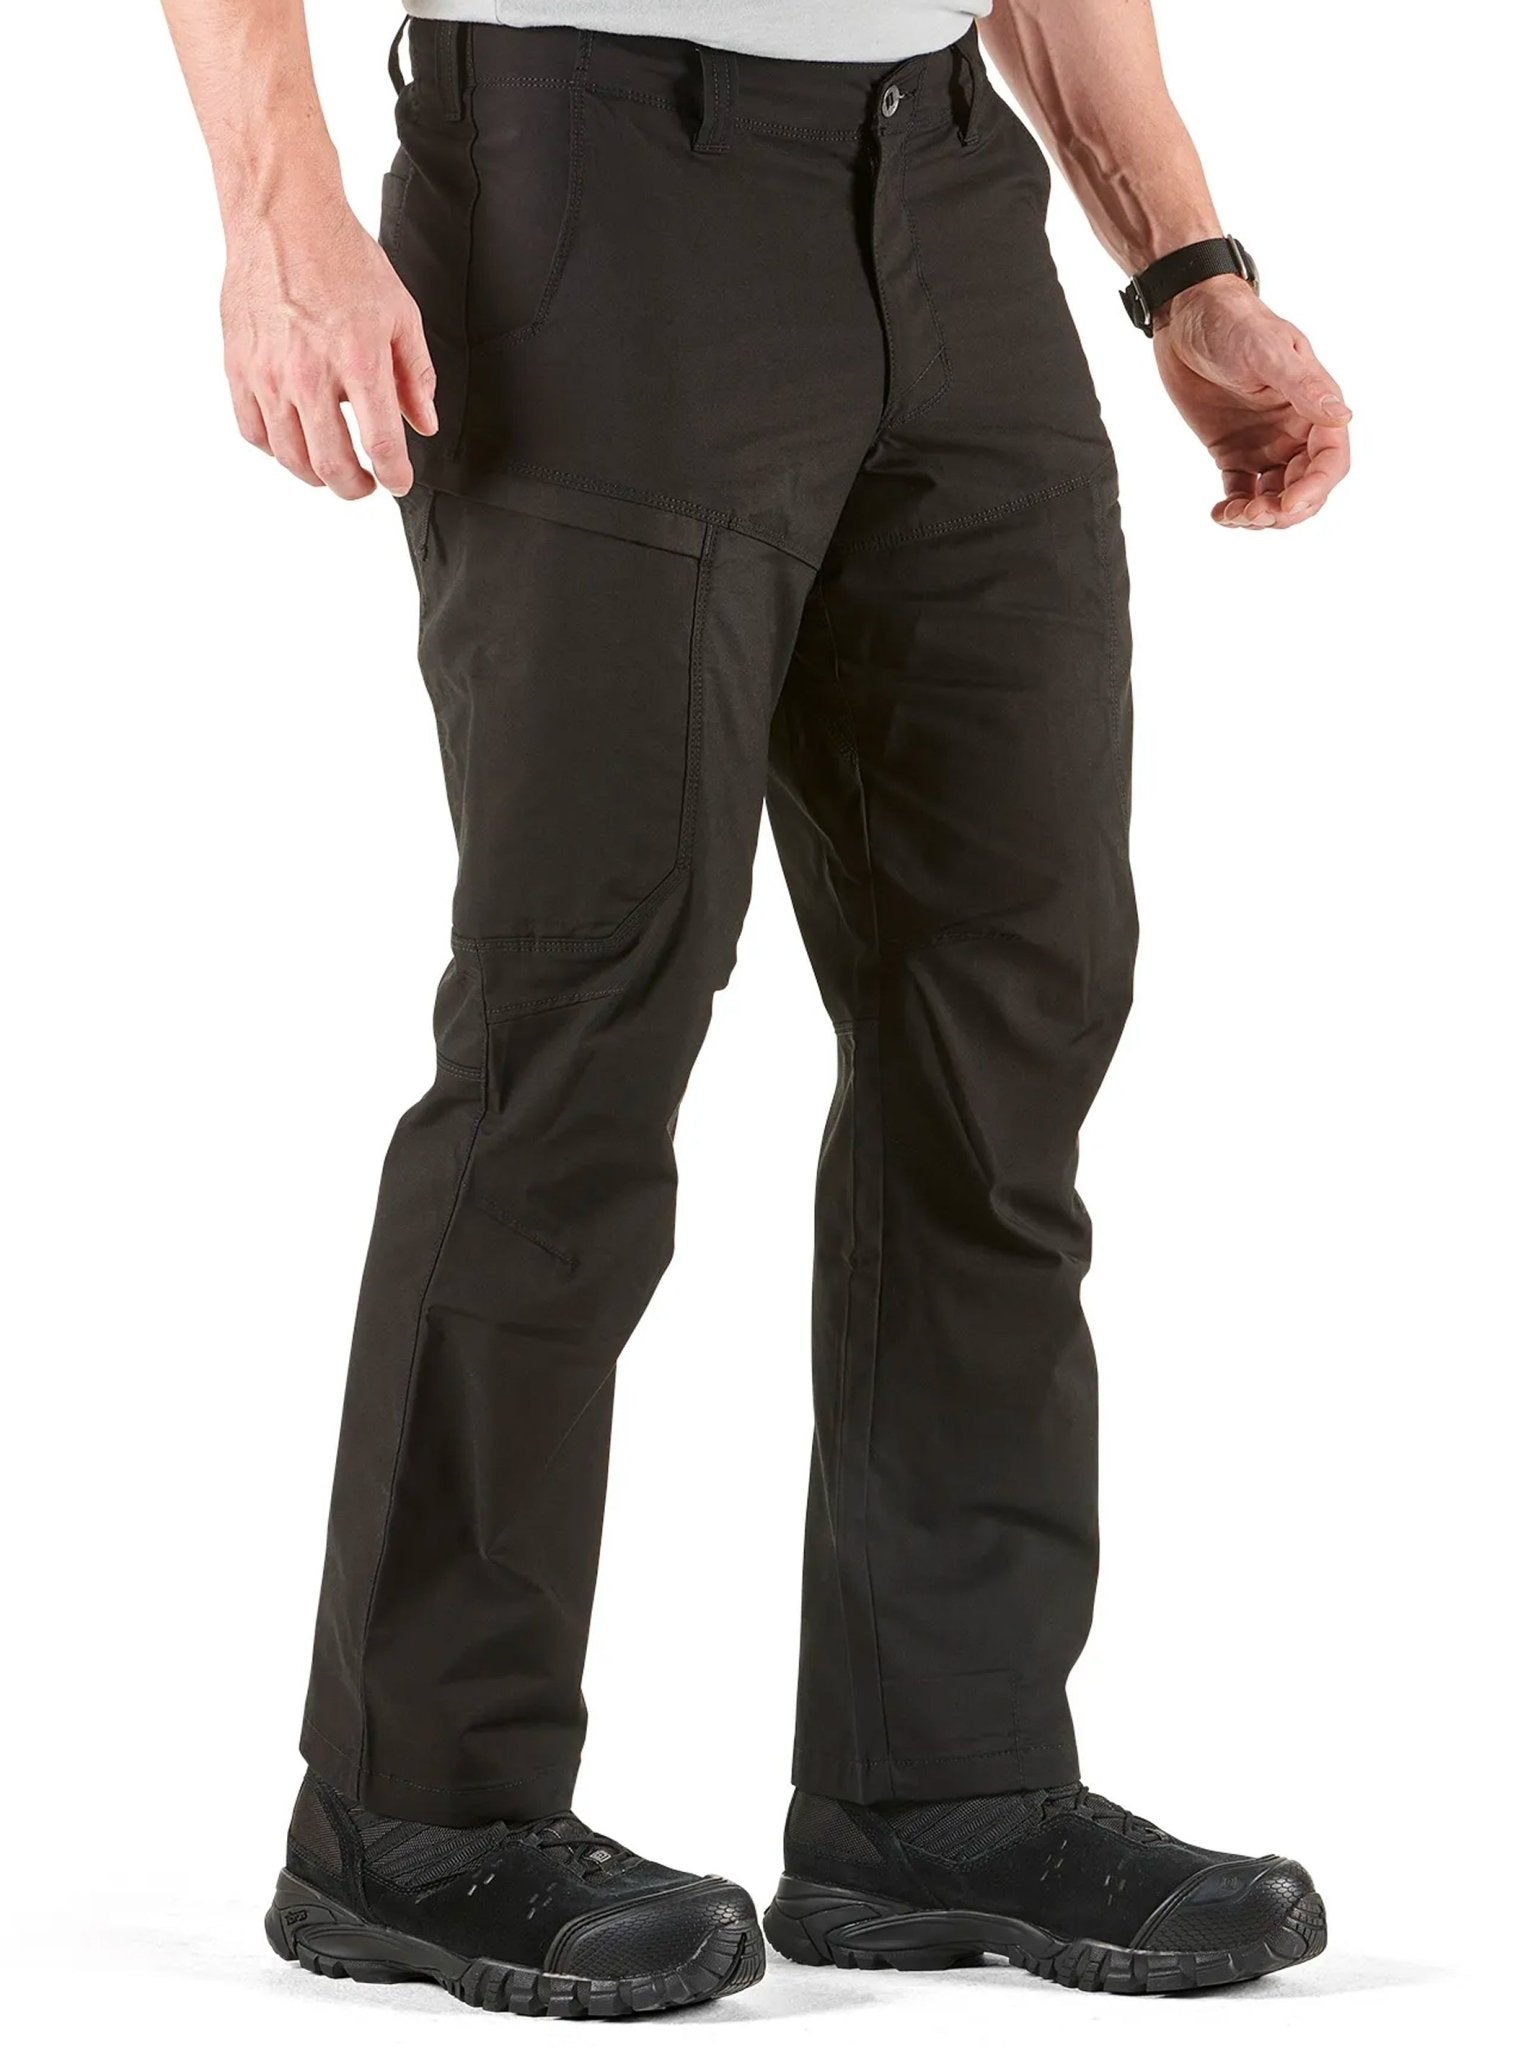 4elementsclothing5.11 Tactical5.11 Tactical - 5.11 APEX® PANT - Mens Apex trouser, 10 pockets, Teflon finished, cuff pocket - Style 74434Trousers & Jeans74434-019-30Wx30L